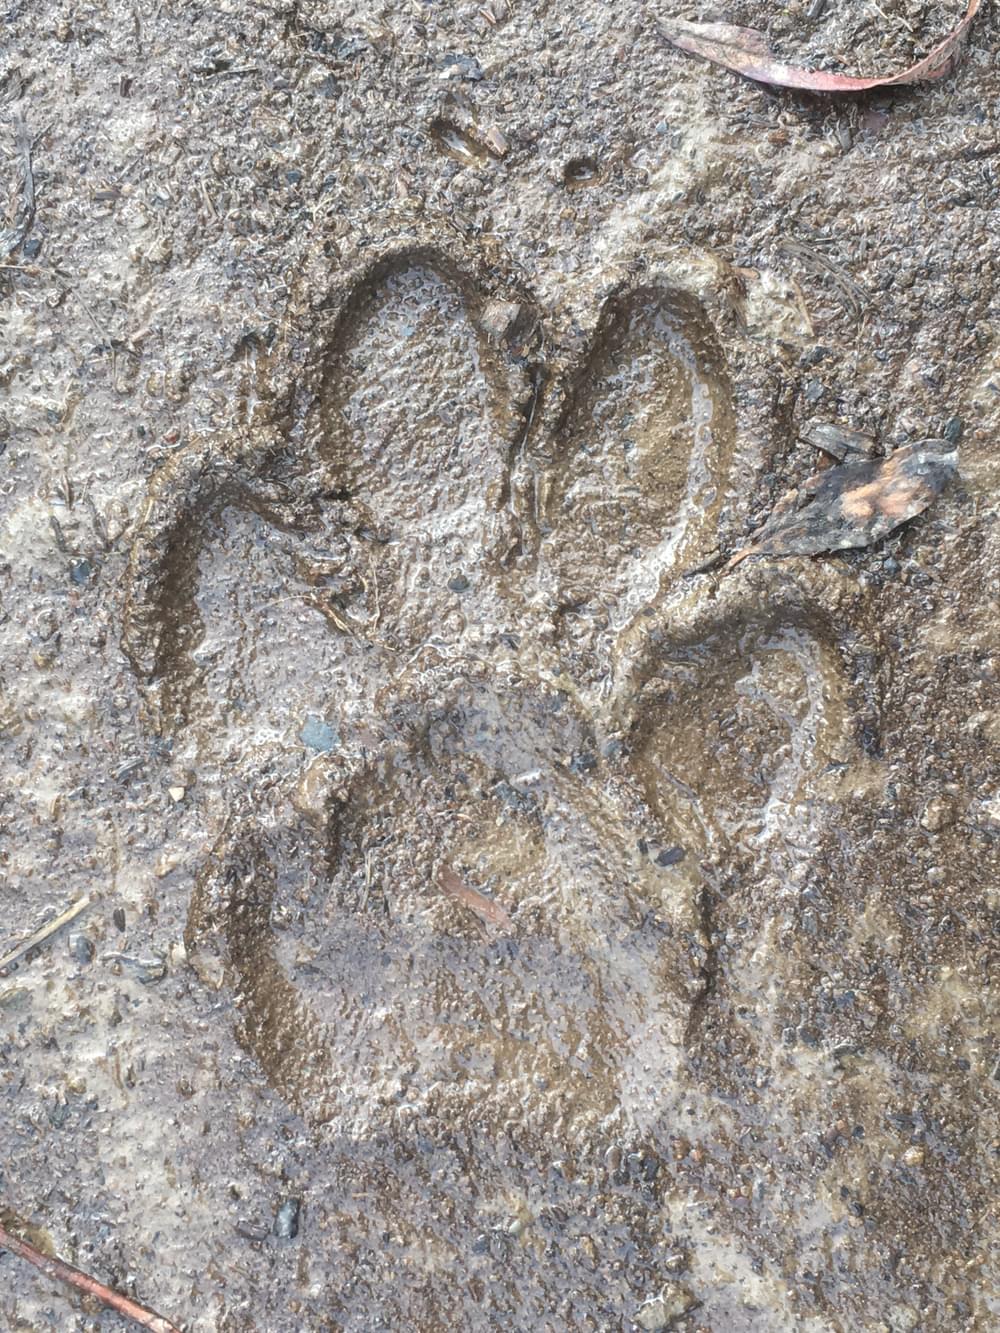 Wolf print on the Resurrection Pass National Recreation Trail